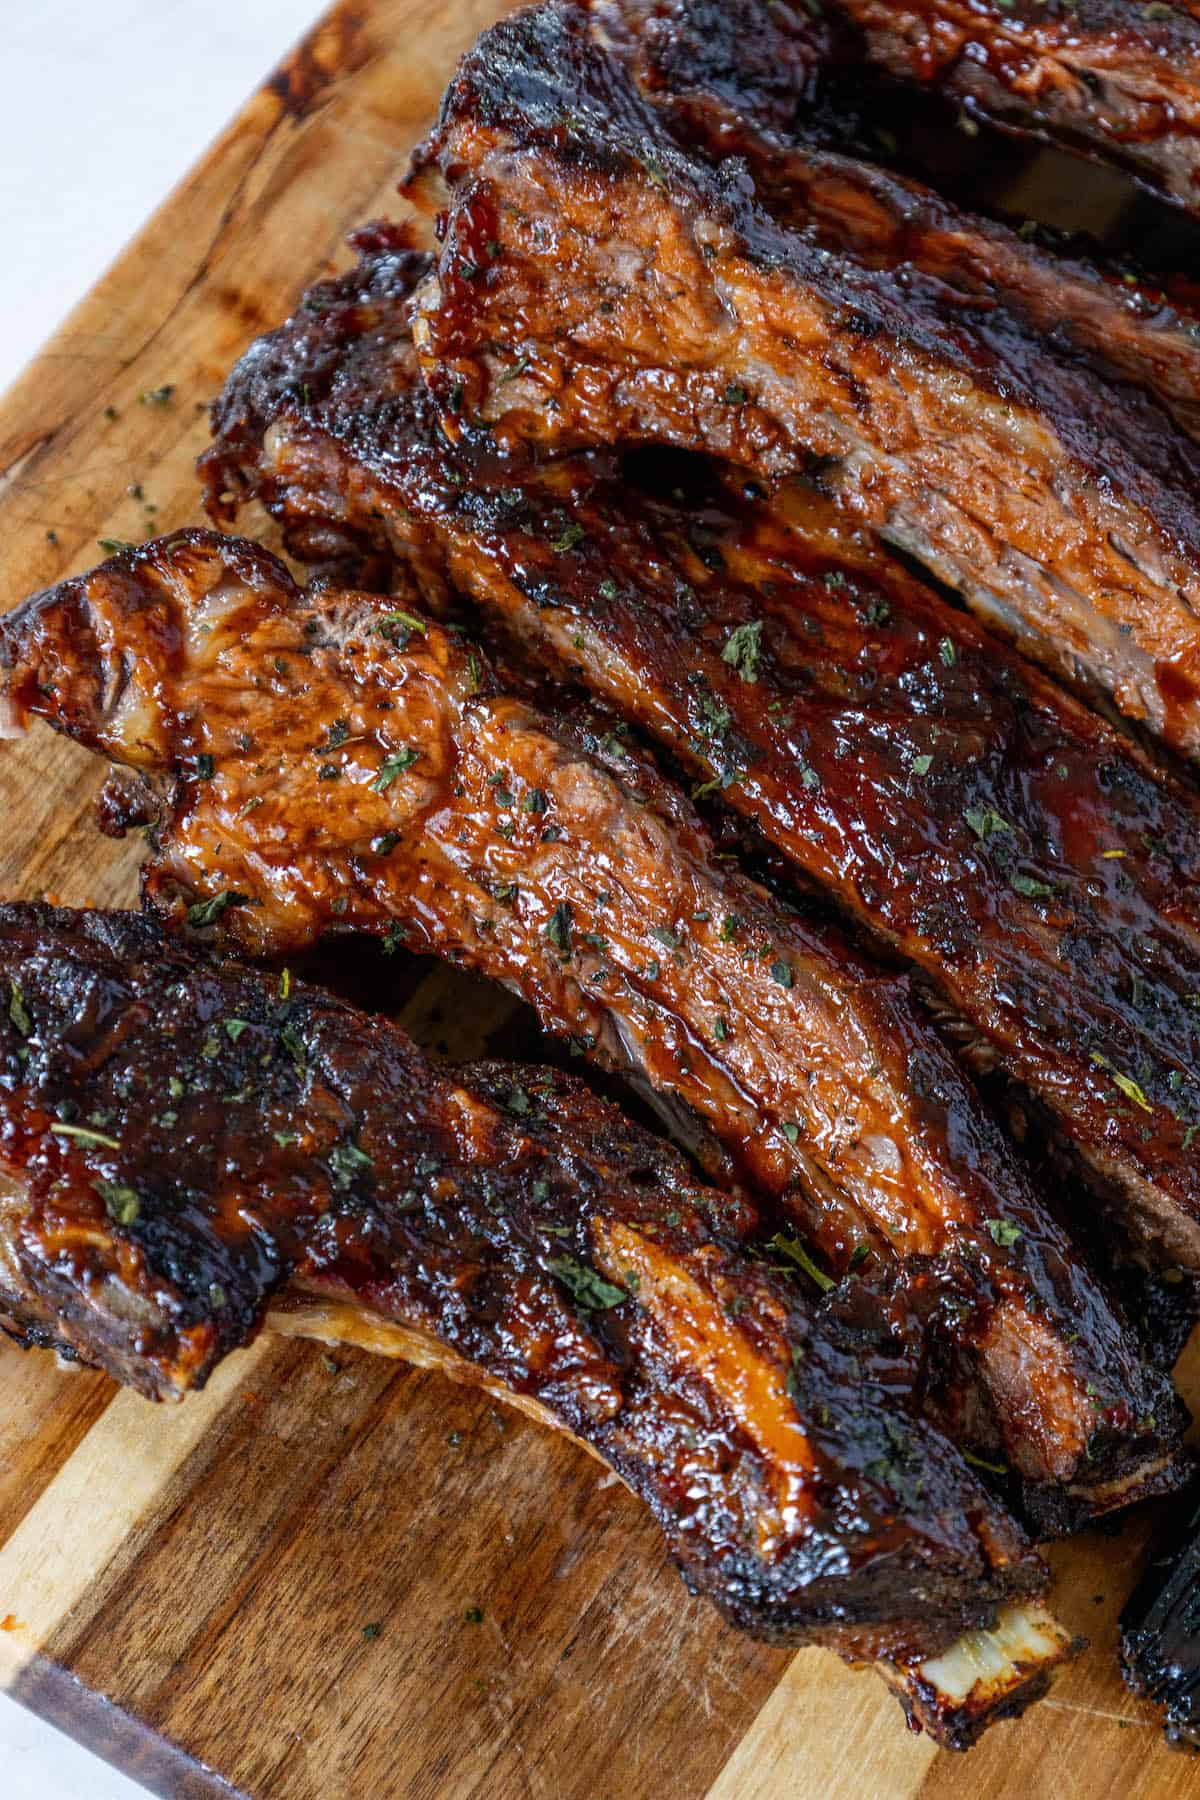 Oven Baked BBQ Ribs on a wooden cutting board.